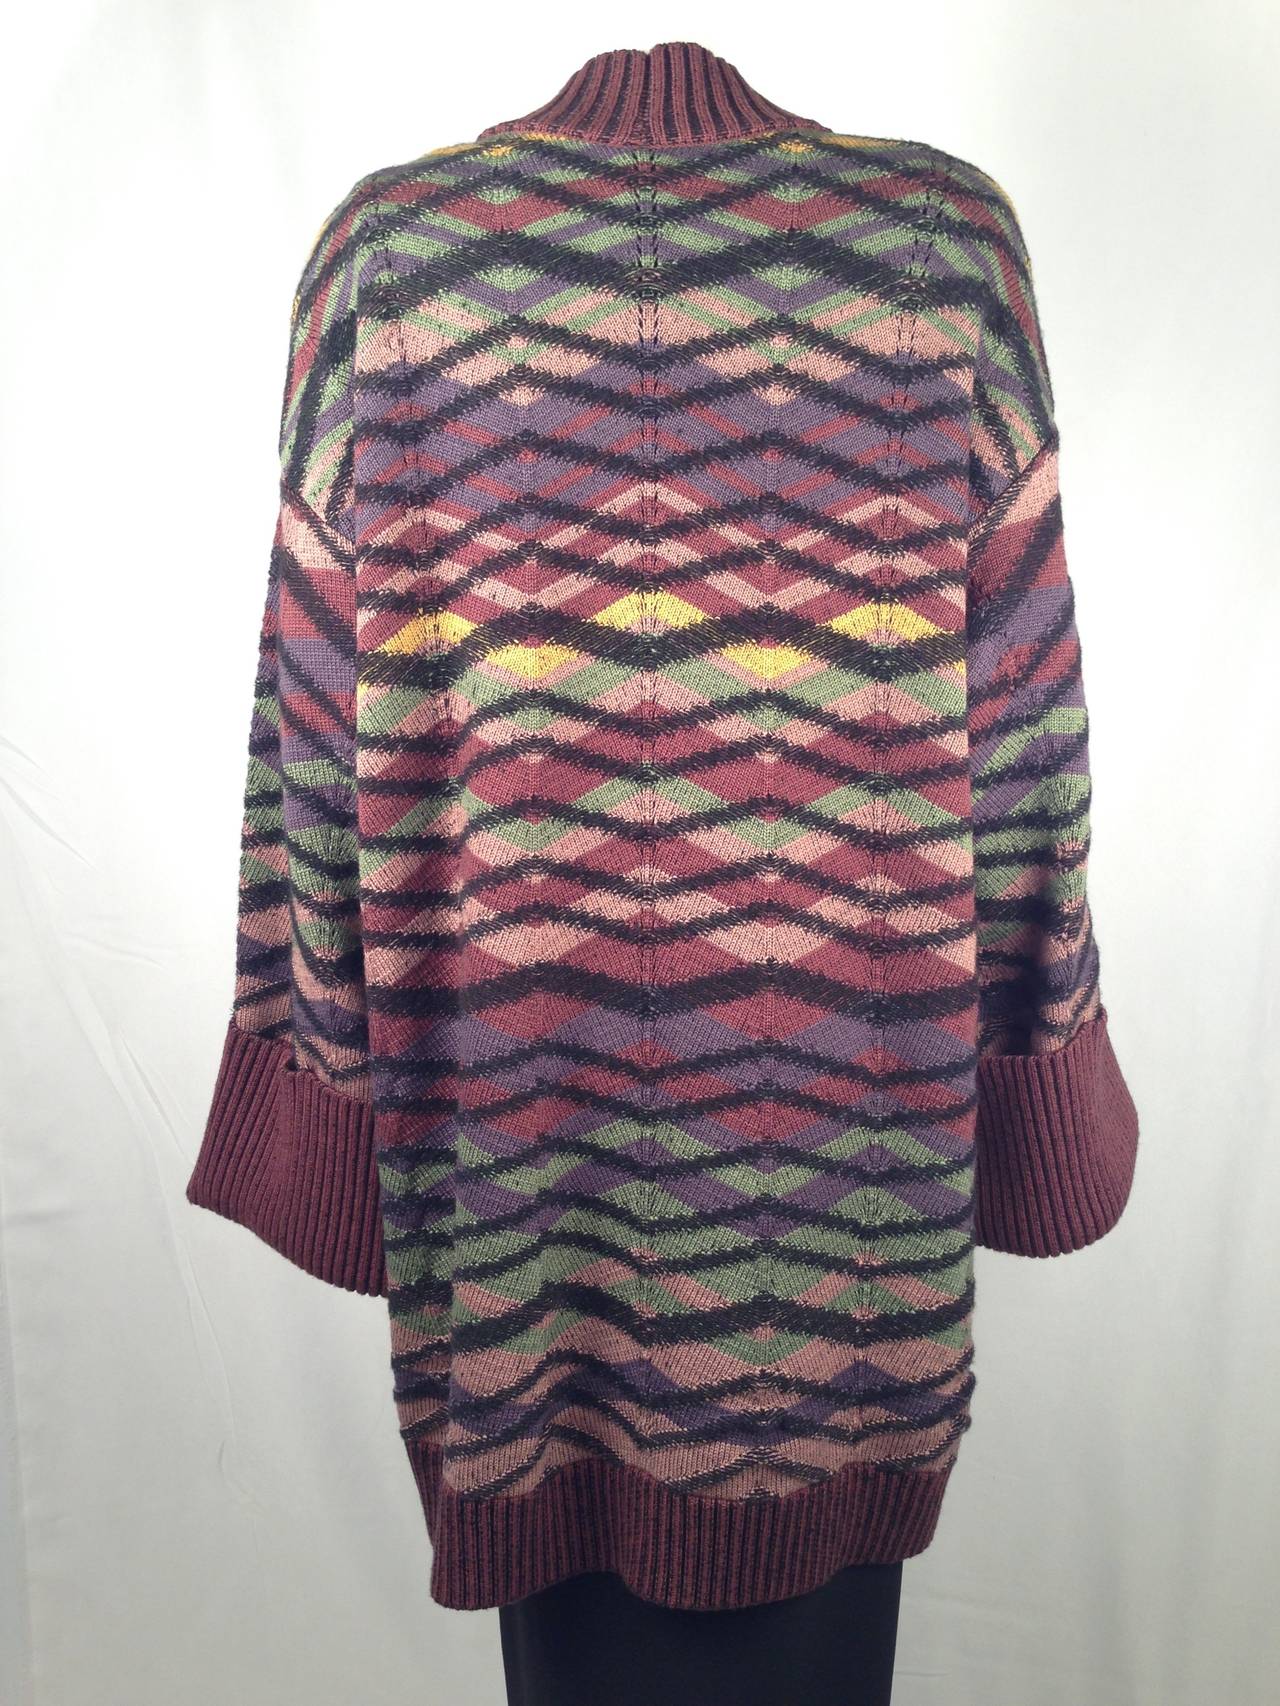 Hard to believe that this luxurious sweater coat dates to the early 1980's!  Absolutely pristine, unworn condition belies its vintage status.  It even has tags!  Inimitable Missoni knit pattern is surrounded by generous, extra-deep ribbed cuffs,